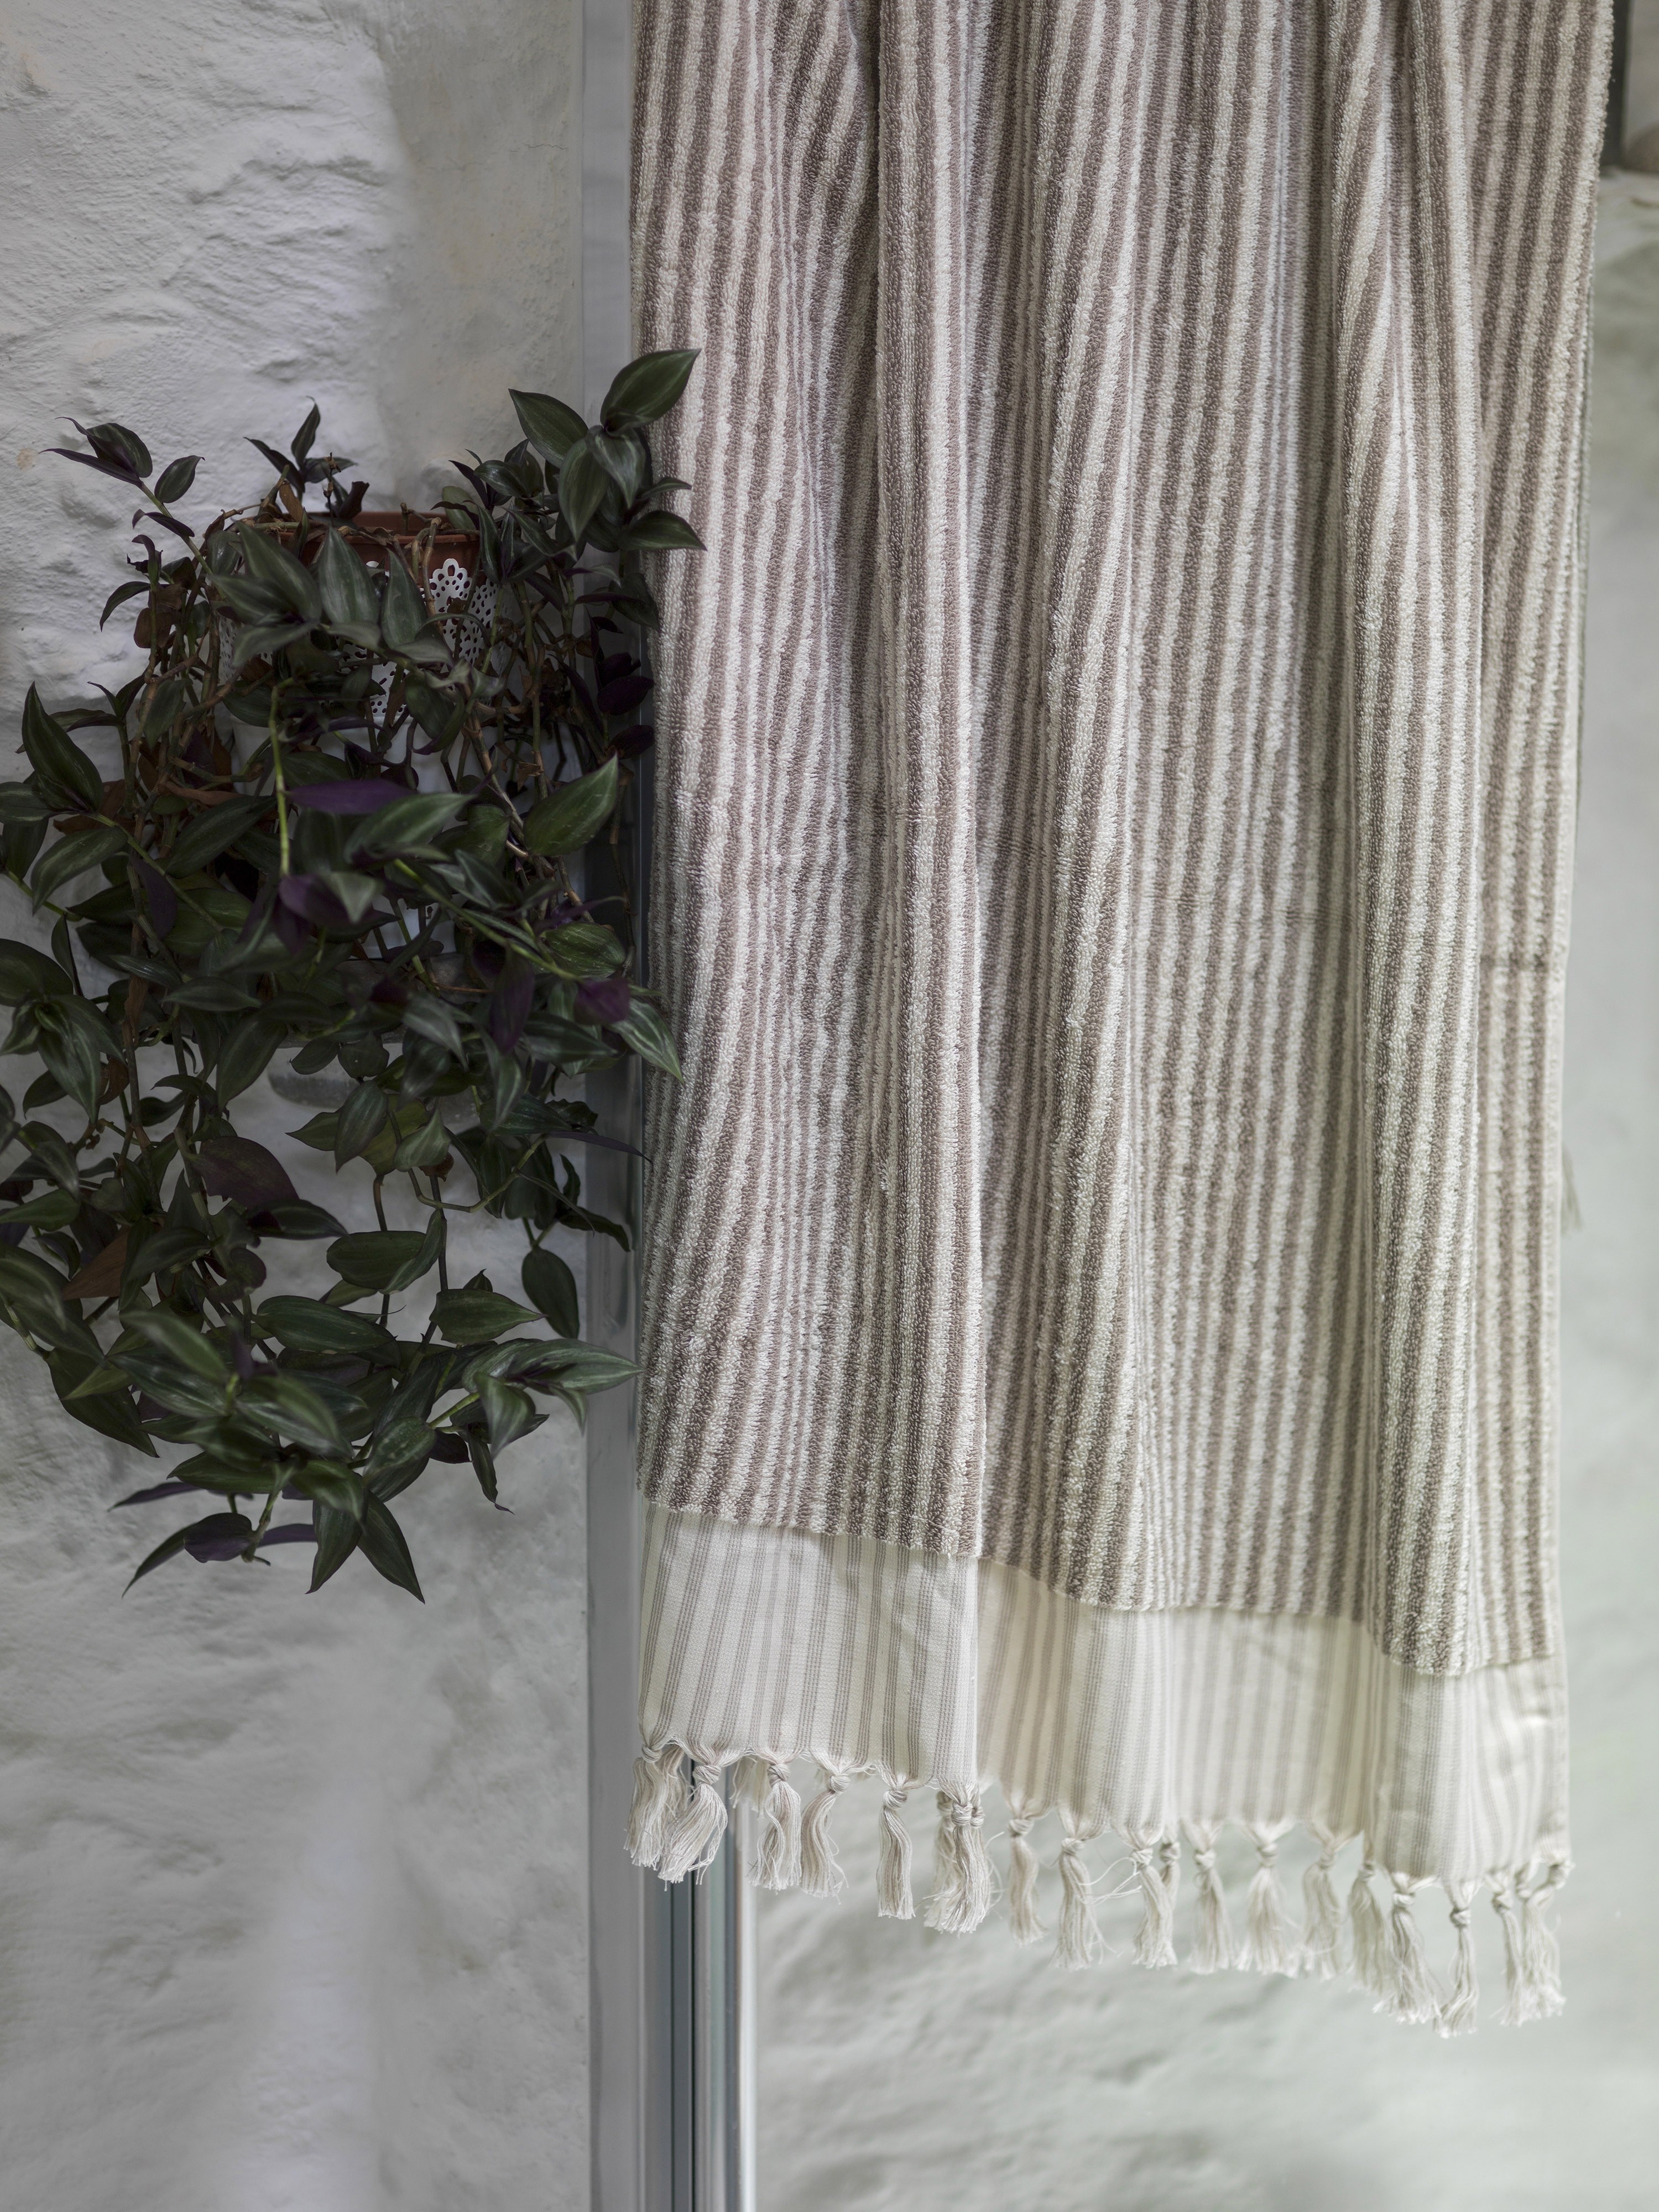 Taupe Striped Terry Bath Towel